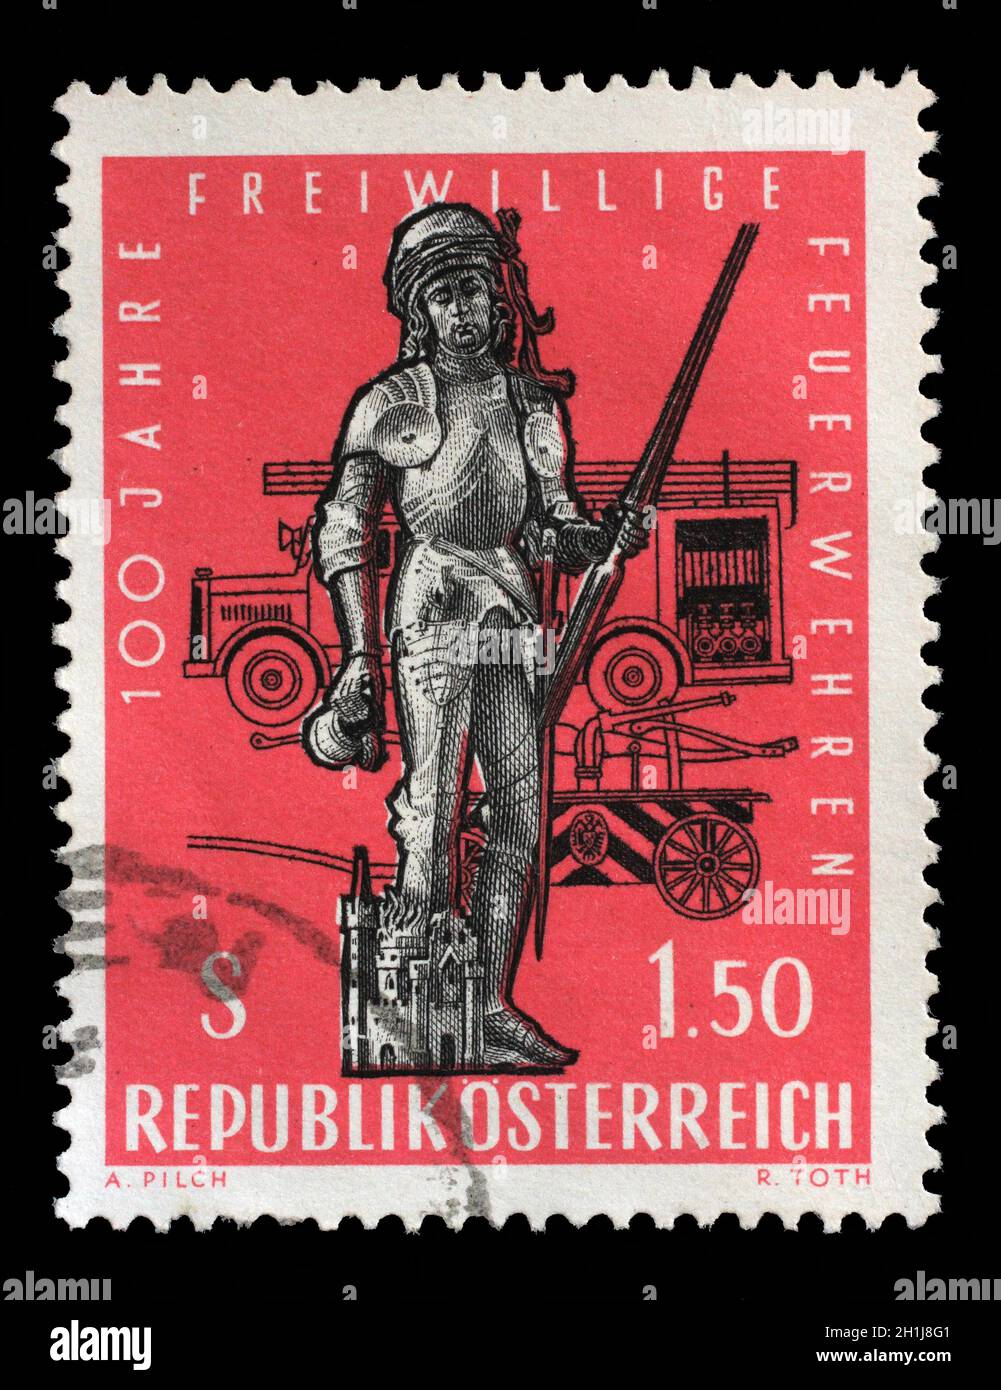 Stamp issued in the Austria shows the Saint Florian Statue in Kefermarkt and Fire Brigade Truck, circa 1963. Stock Photo